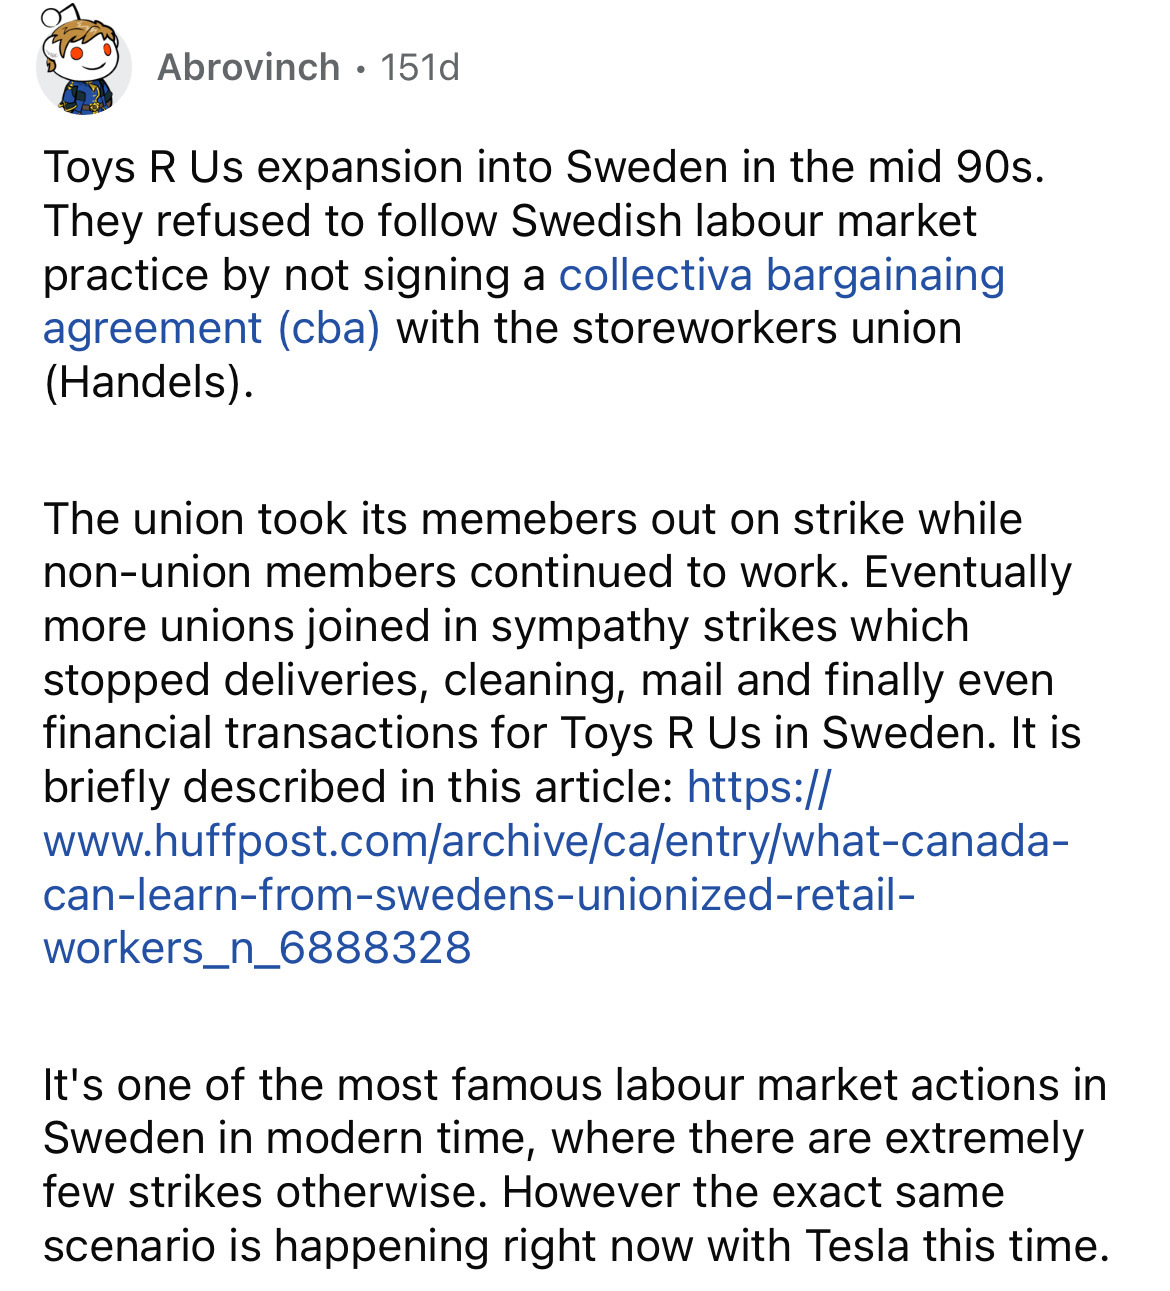 document - Abrovinch 151d Toys R Us expansion into Sweden in the mid 90s. They refused to Swedish labour market practice by not signing a collectiva bargainaing agreement cba with the storeworkers union Handels. The union took its memebers out on strike w